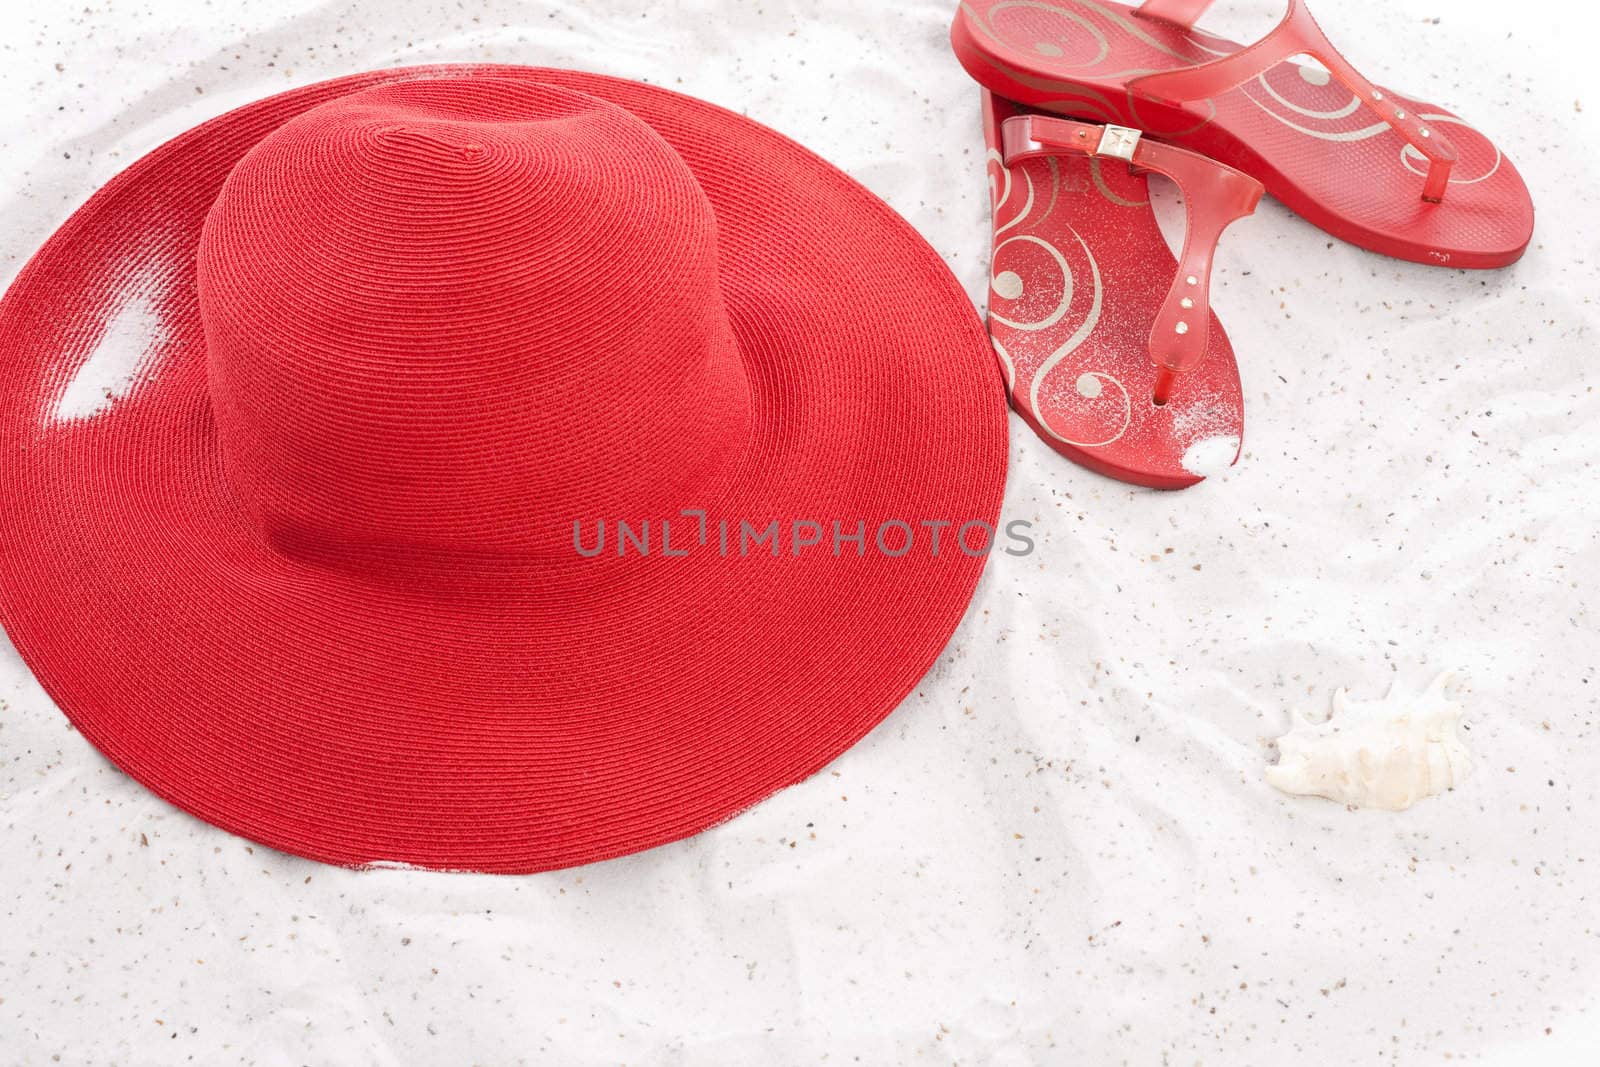 Big summerhat and flipflops lying in the sand